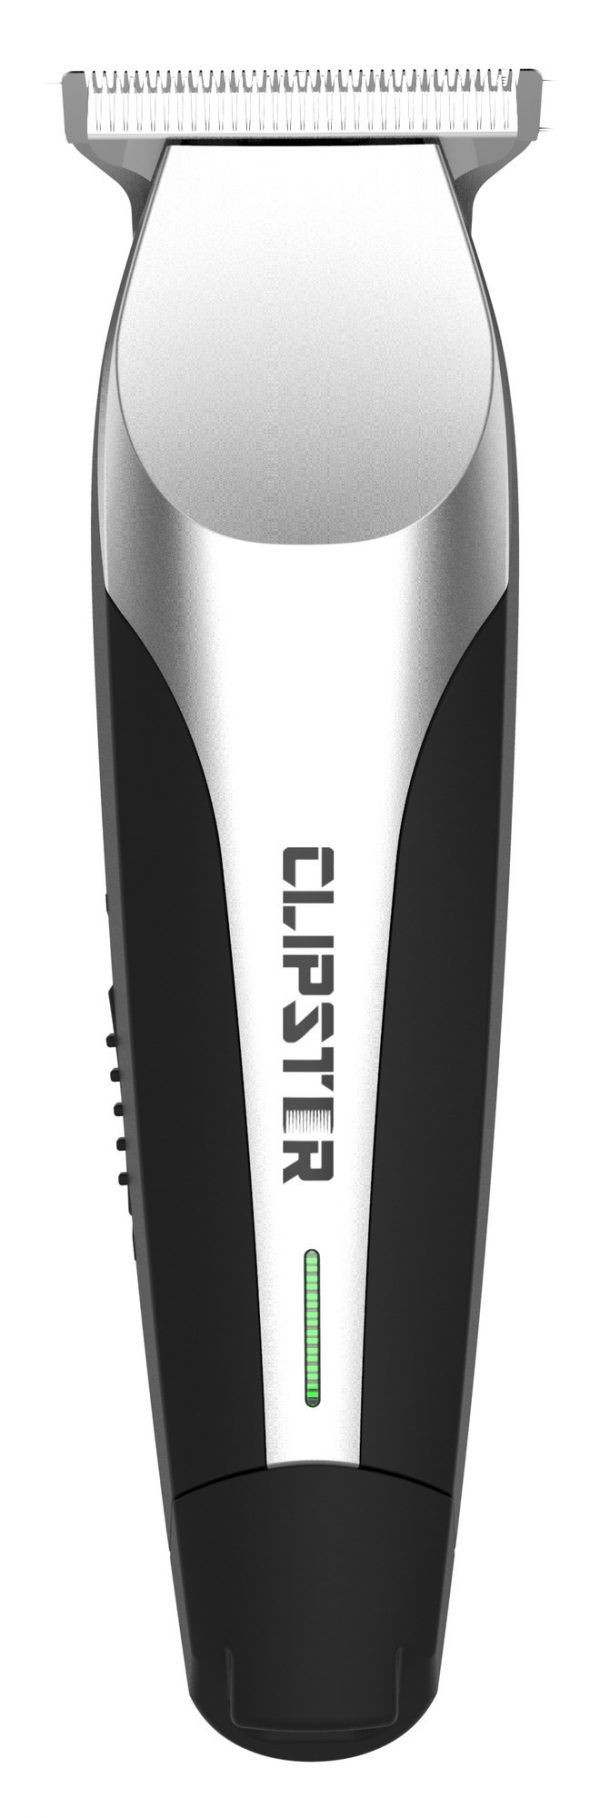 Clipster Trimox Trimmer